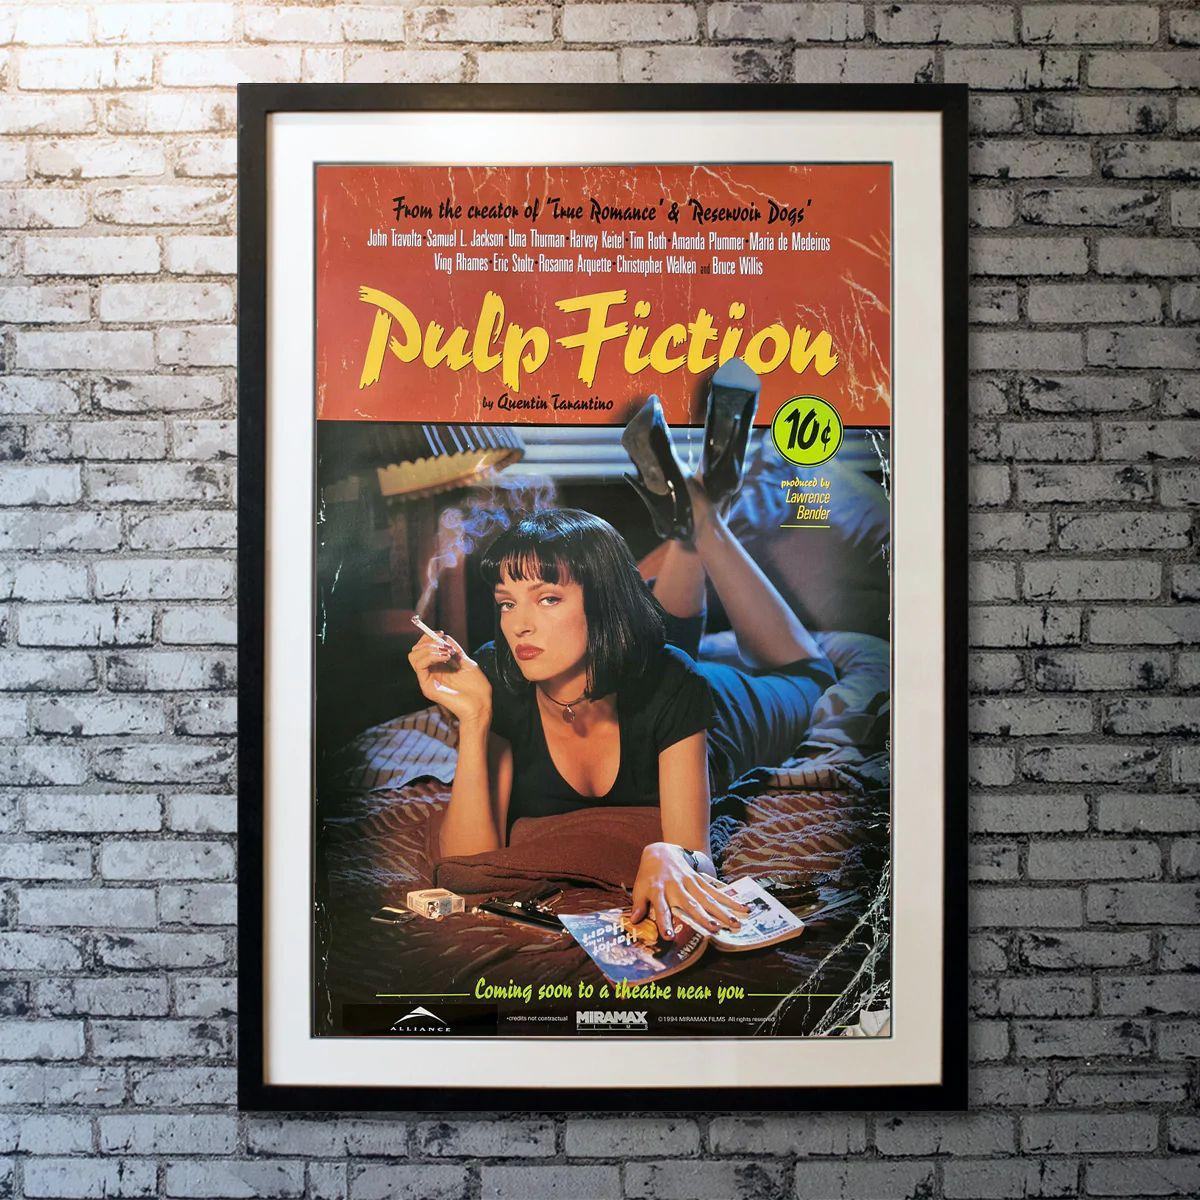 Pulp Fiction, Unframed Poster, 1994

Original One Sheet (27 x 41 inches). Original 'Lucky Strike' style one sheet for Pulp Fiction. The first poster produced for Pulp Fiction was famously recalled because they did not have clearance to use the